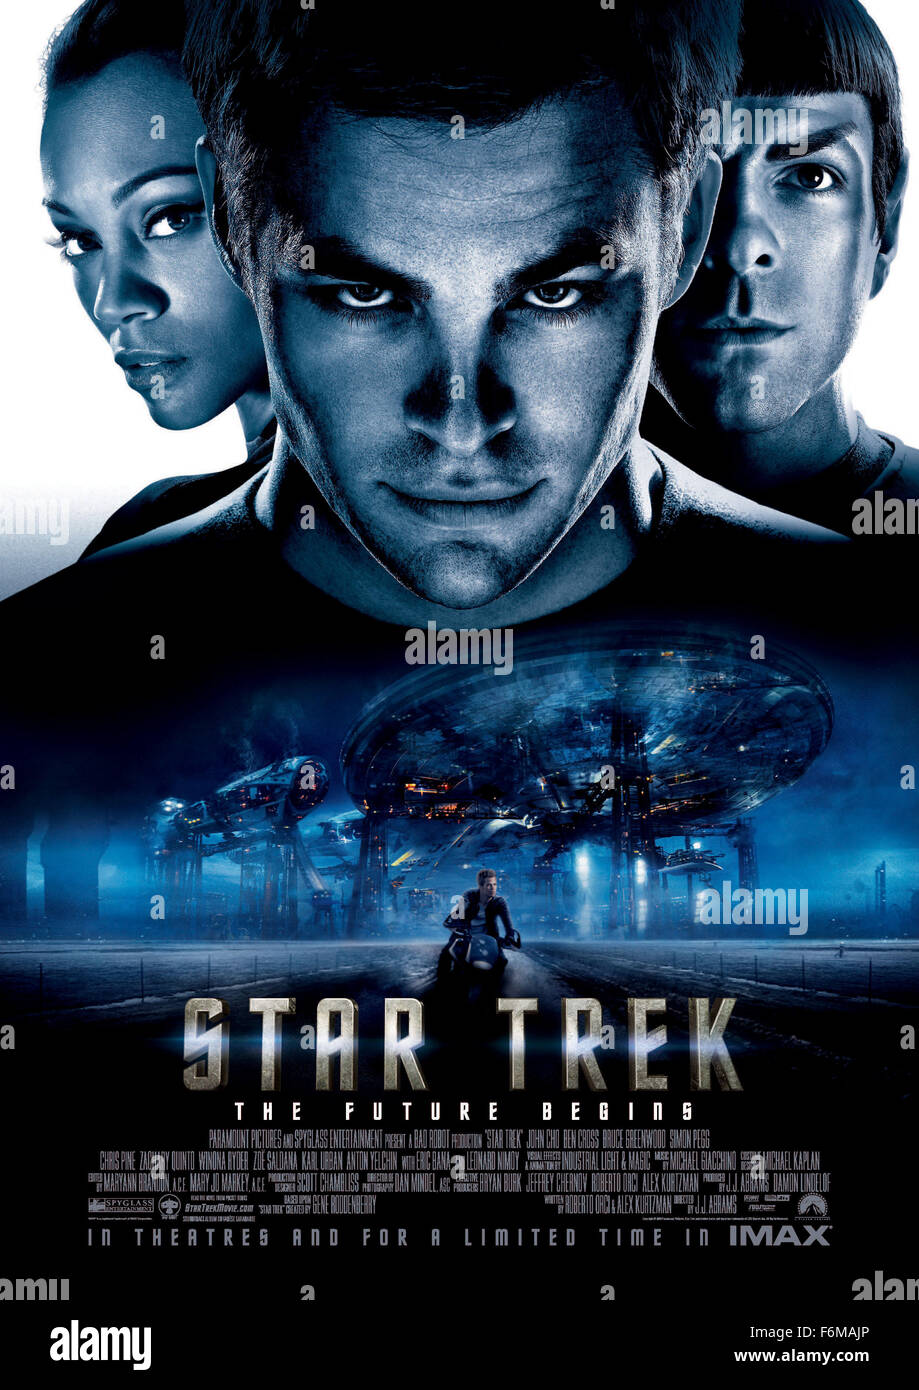 RELEASE DATE: May 8, 2009. MOVIE TITLE: Star Trek. STUDIO: Paramount Pictures. PLOT: A chronicle of the early days of James T. Kirk and his fellow USS Enterprise crew members. PICTURED: CHRIS PINE as James T. Kirk, ZACHARY QUINTO as Spock and ZOE SALDANA as Nyota Uhura. Stock Photo